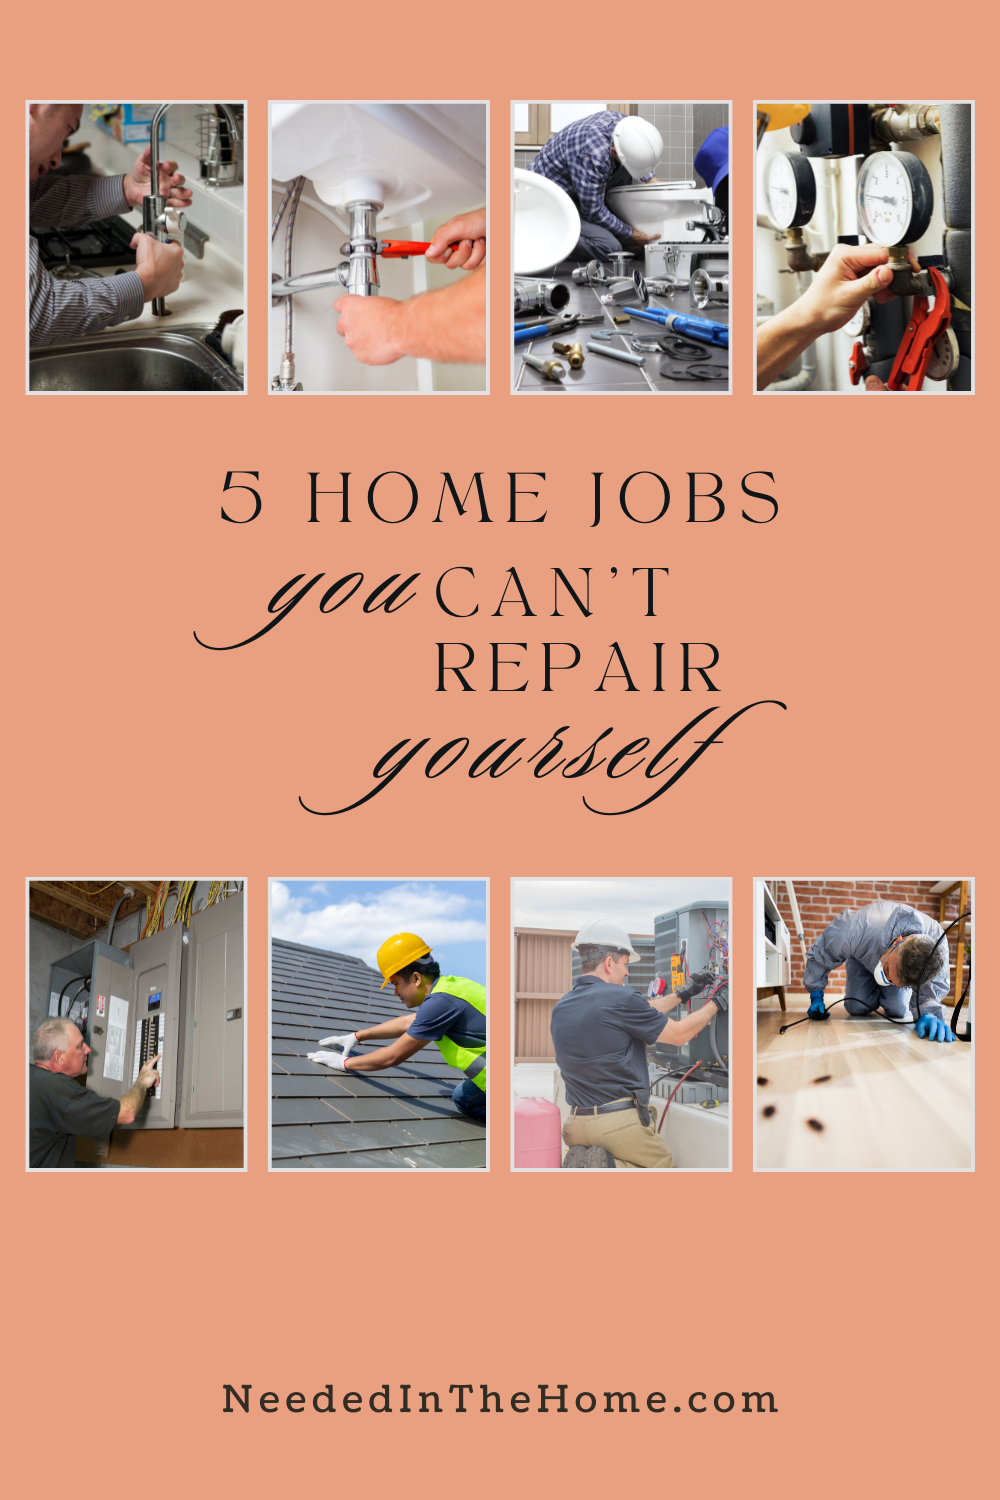 pinterest-pin-description 5 home jobs you can't repair yourself plumbing electrical roofing hvac pest control specialists working neededinthehome